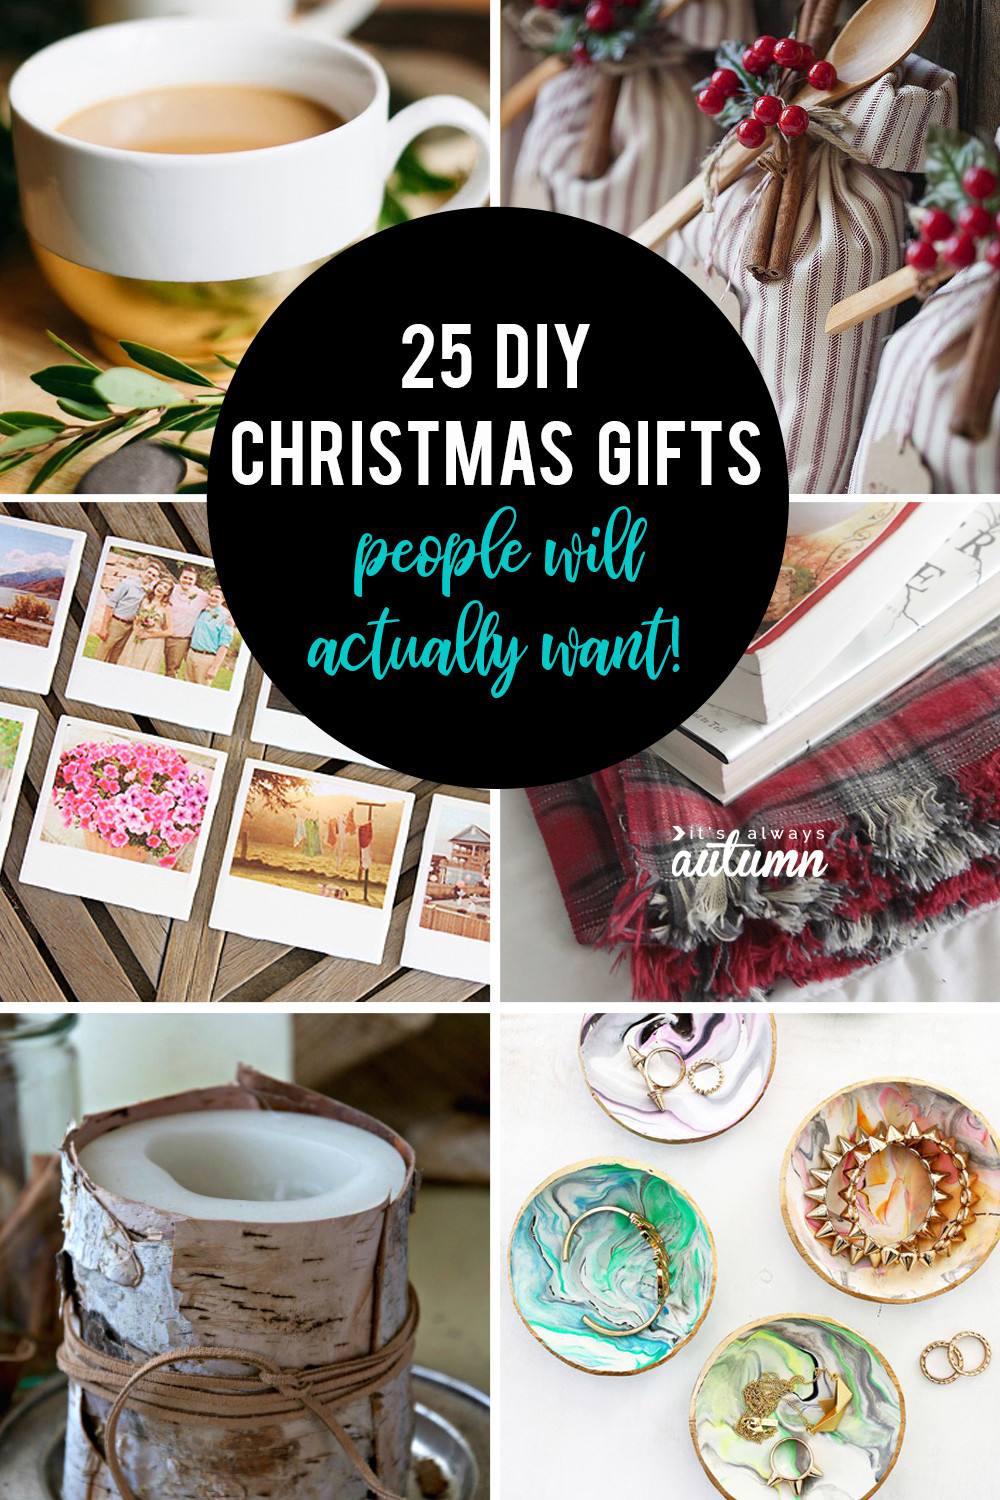 Christmas Baskets DIY
 25 amazing DIY ts people will actually want It s